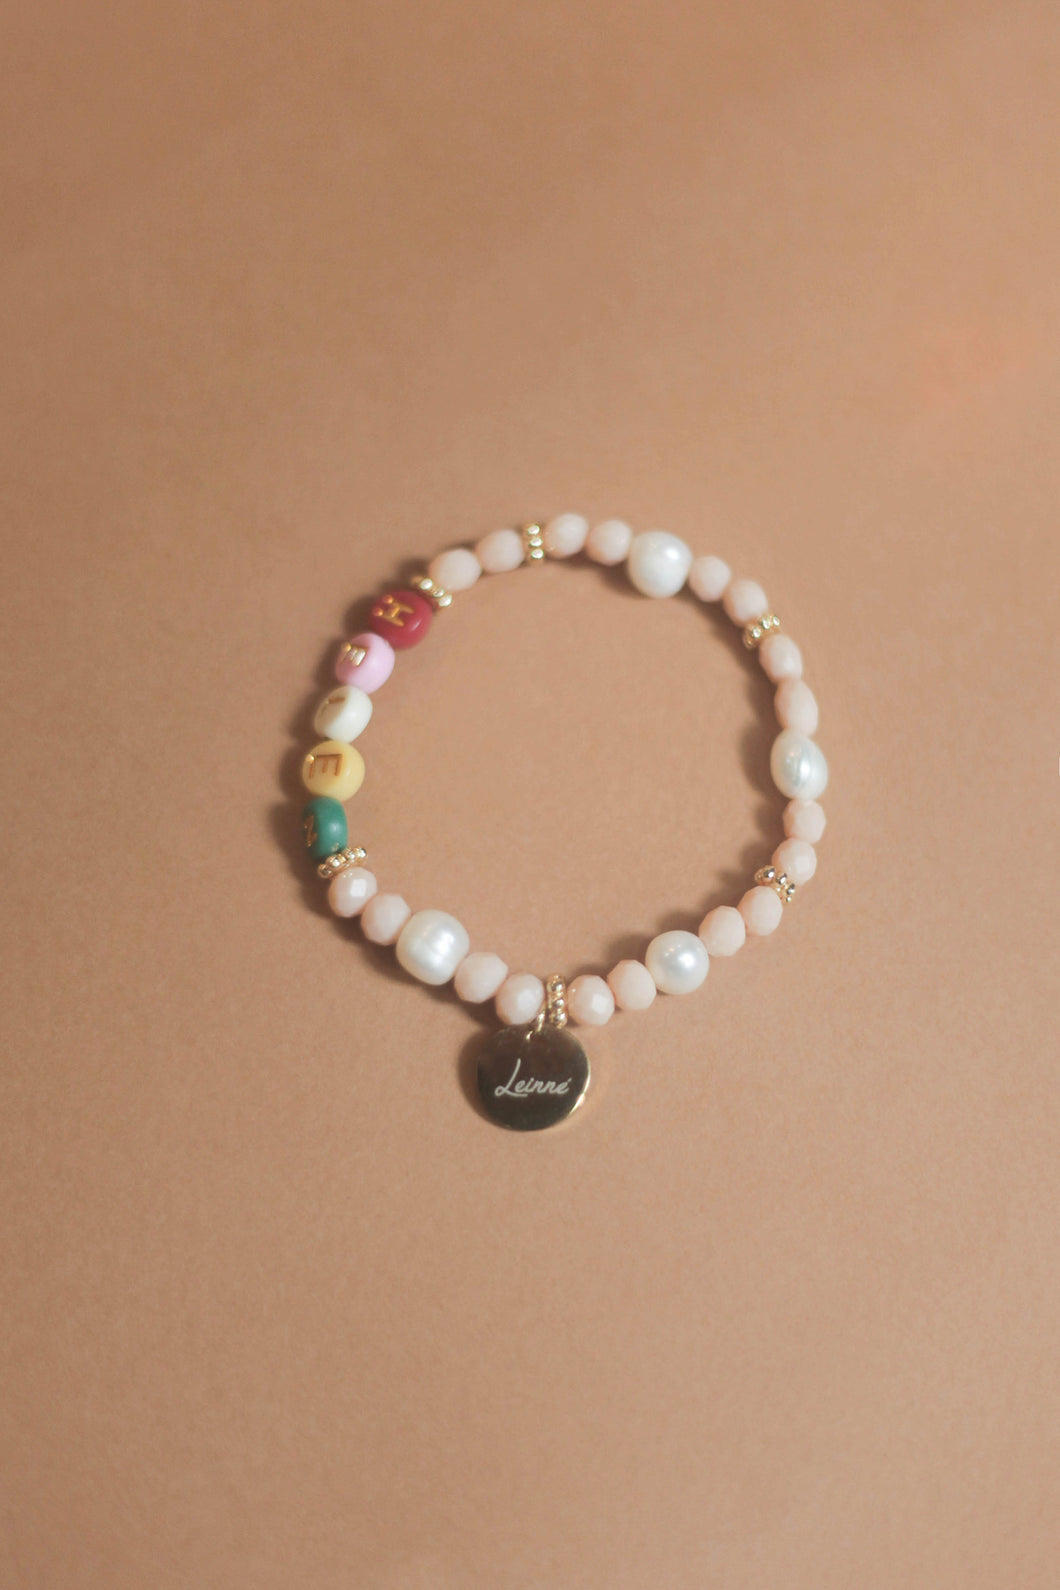 Candy pearl personalized bracelet